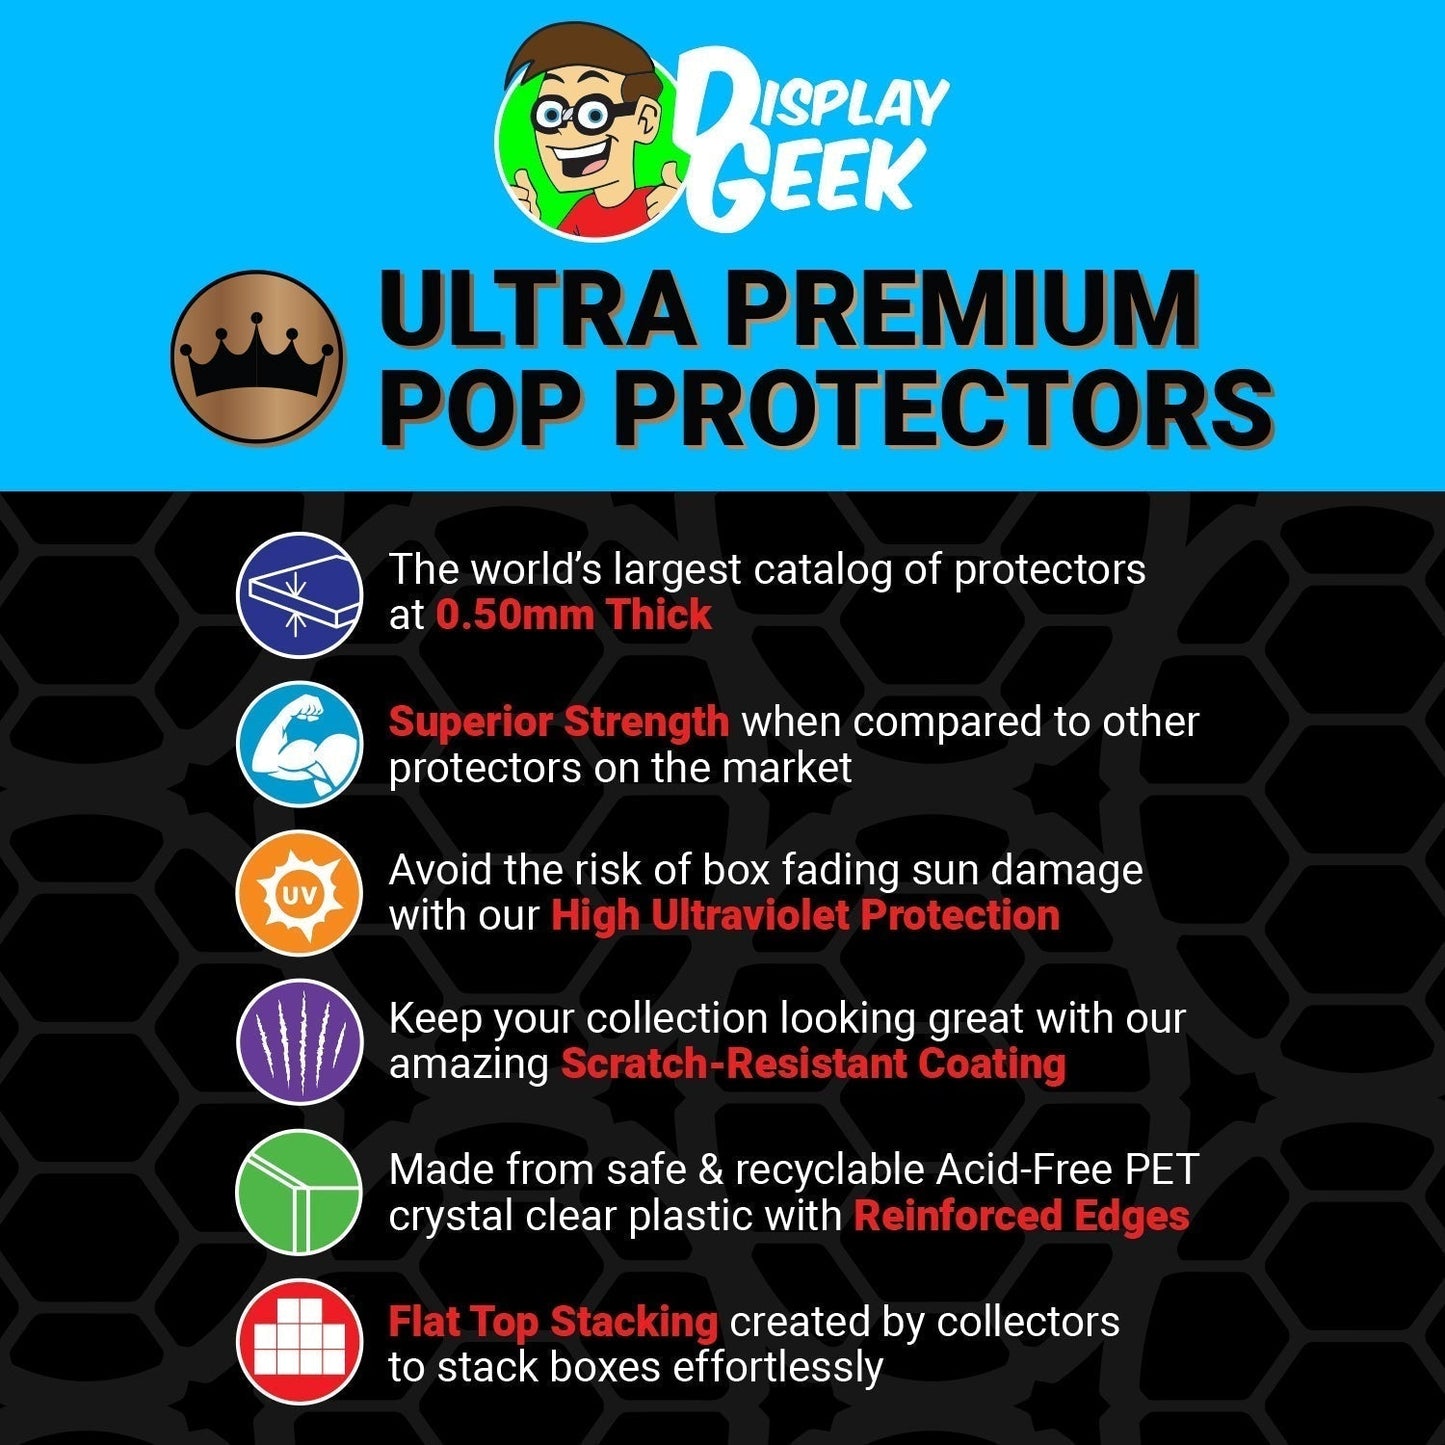 Pop Protector for Funkoverse Space Jam A New Legacy 100 Chase Funko 2 Pack - PPG Pop Protector Guide Search Created by Display Geek